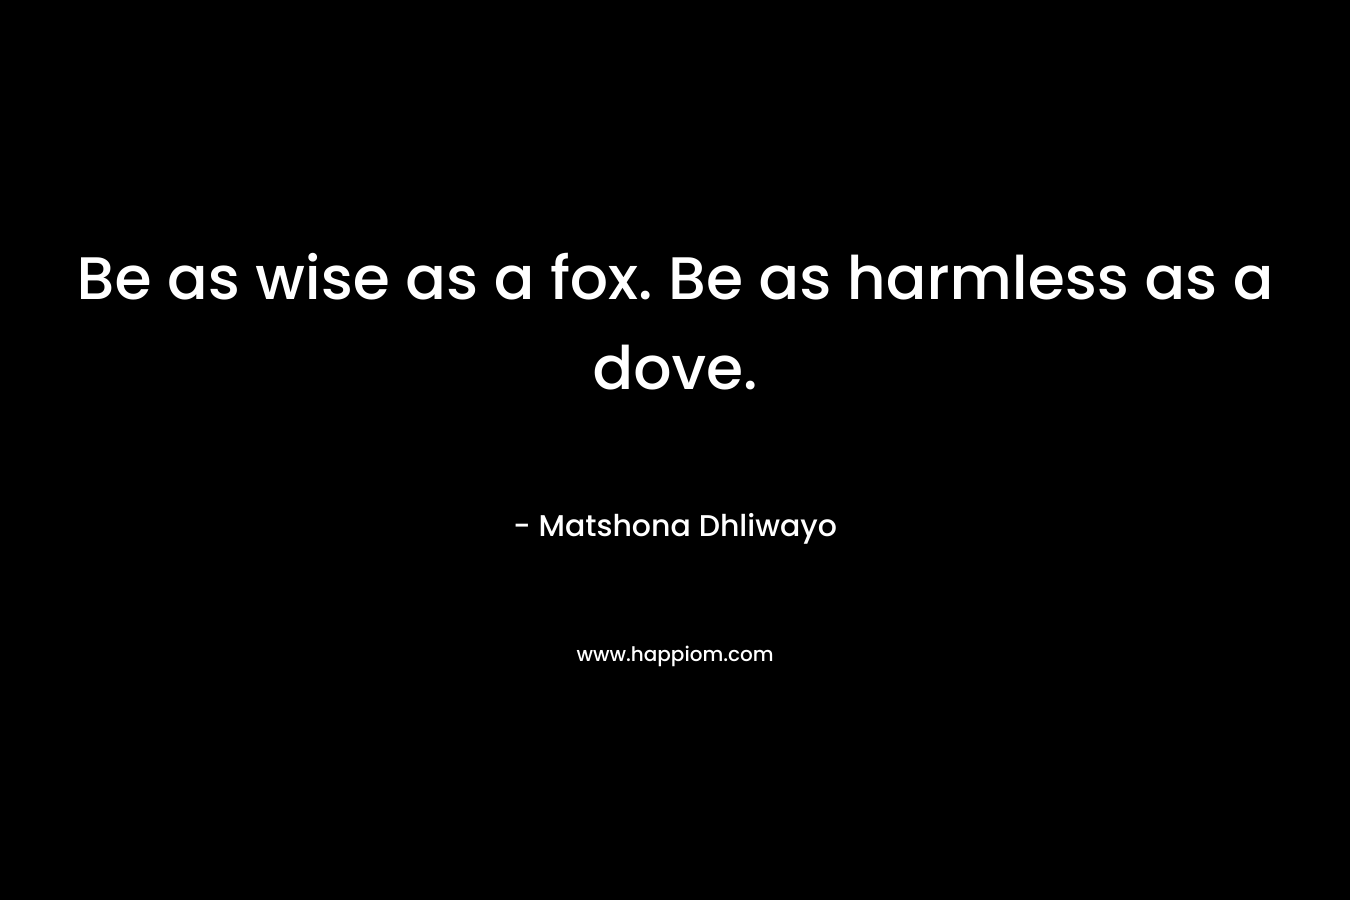 Be as wise as a fox. Be as harmless as a dove. – Matshona Dhliwayo